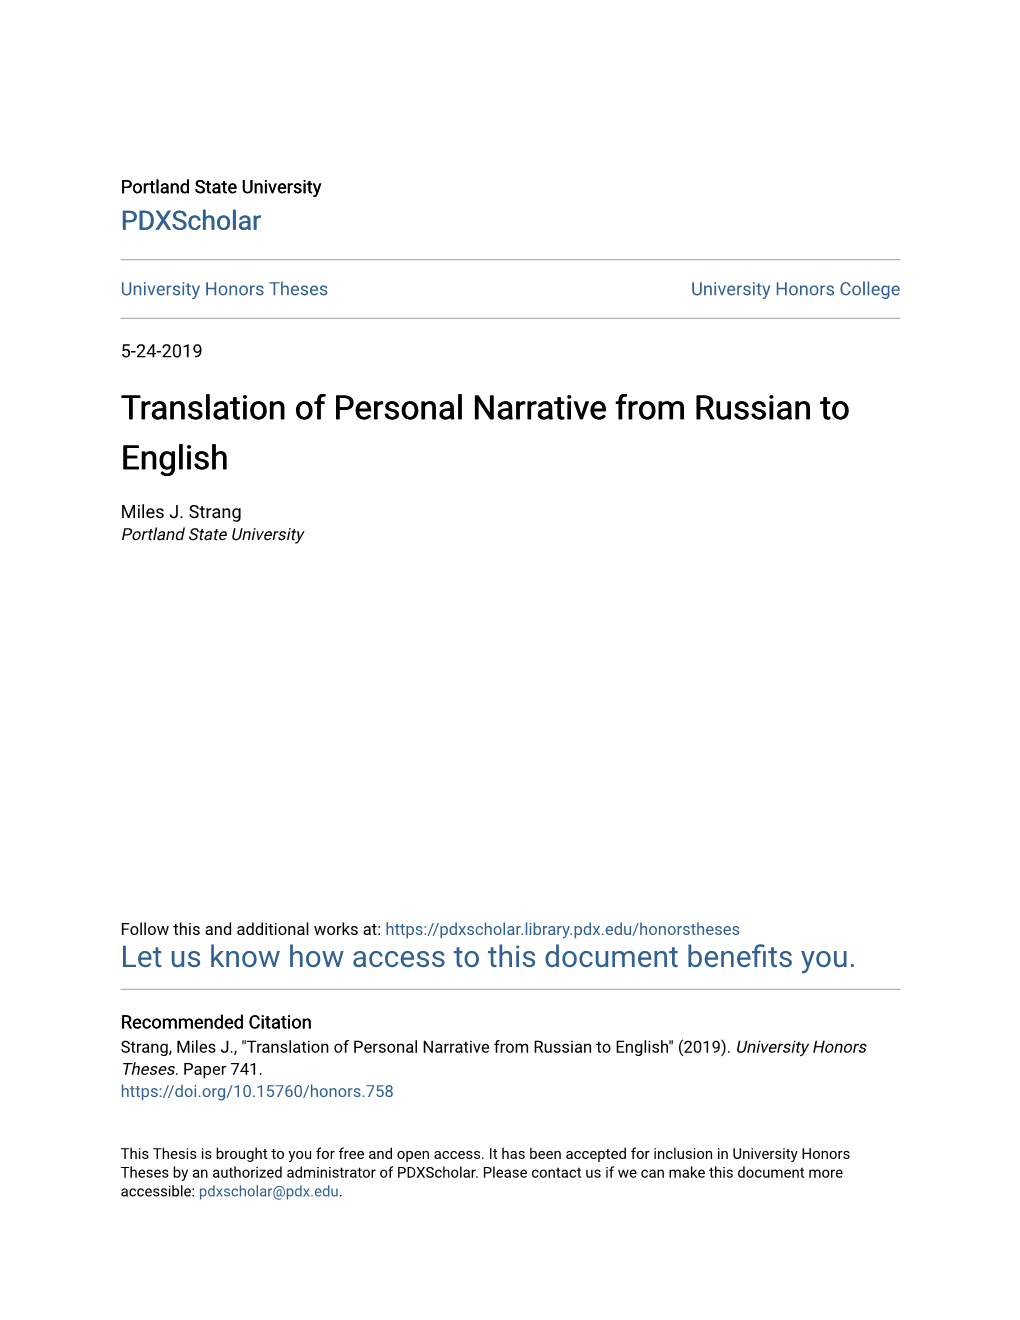 Translation of Personal Narrative from Russian to English